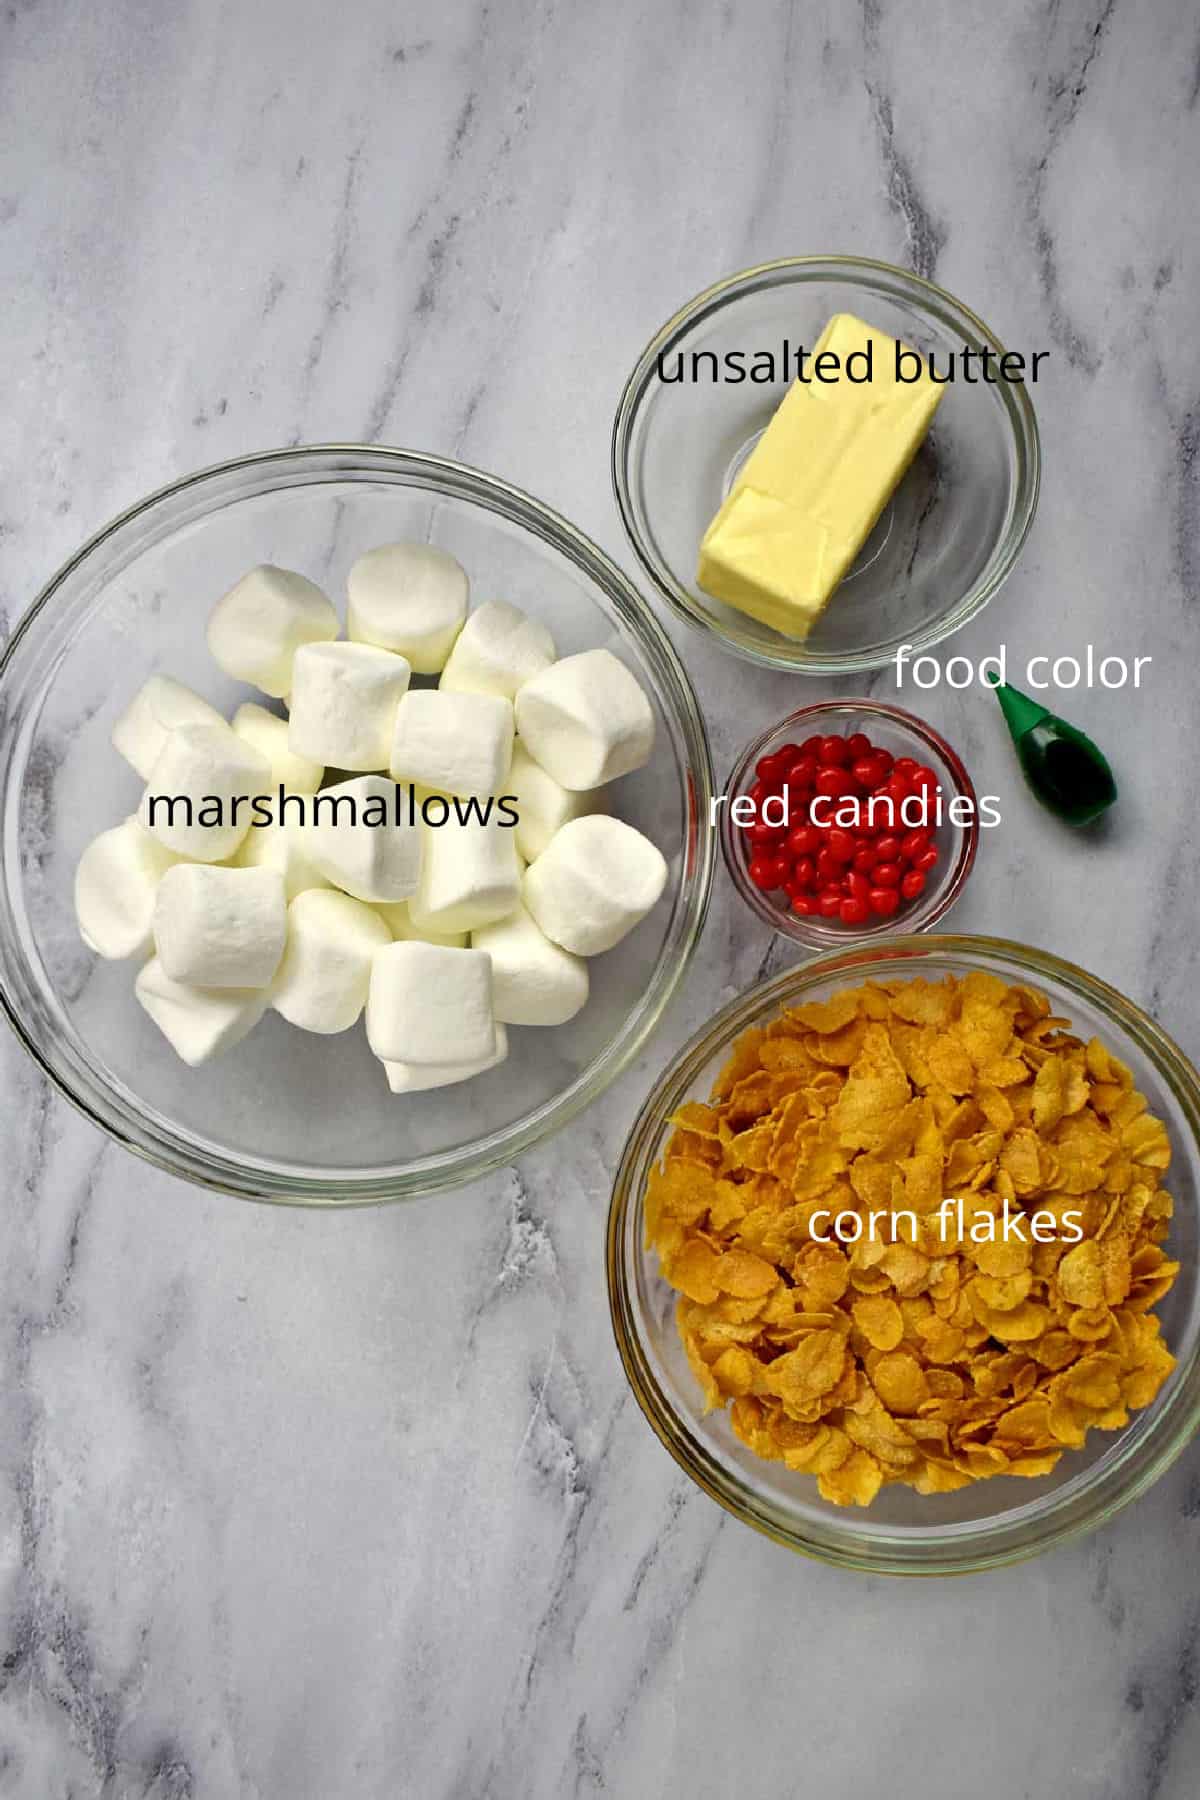 Labeled ingredients for holly cookies on counter.